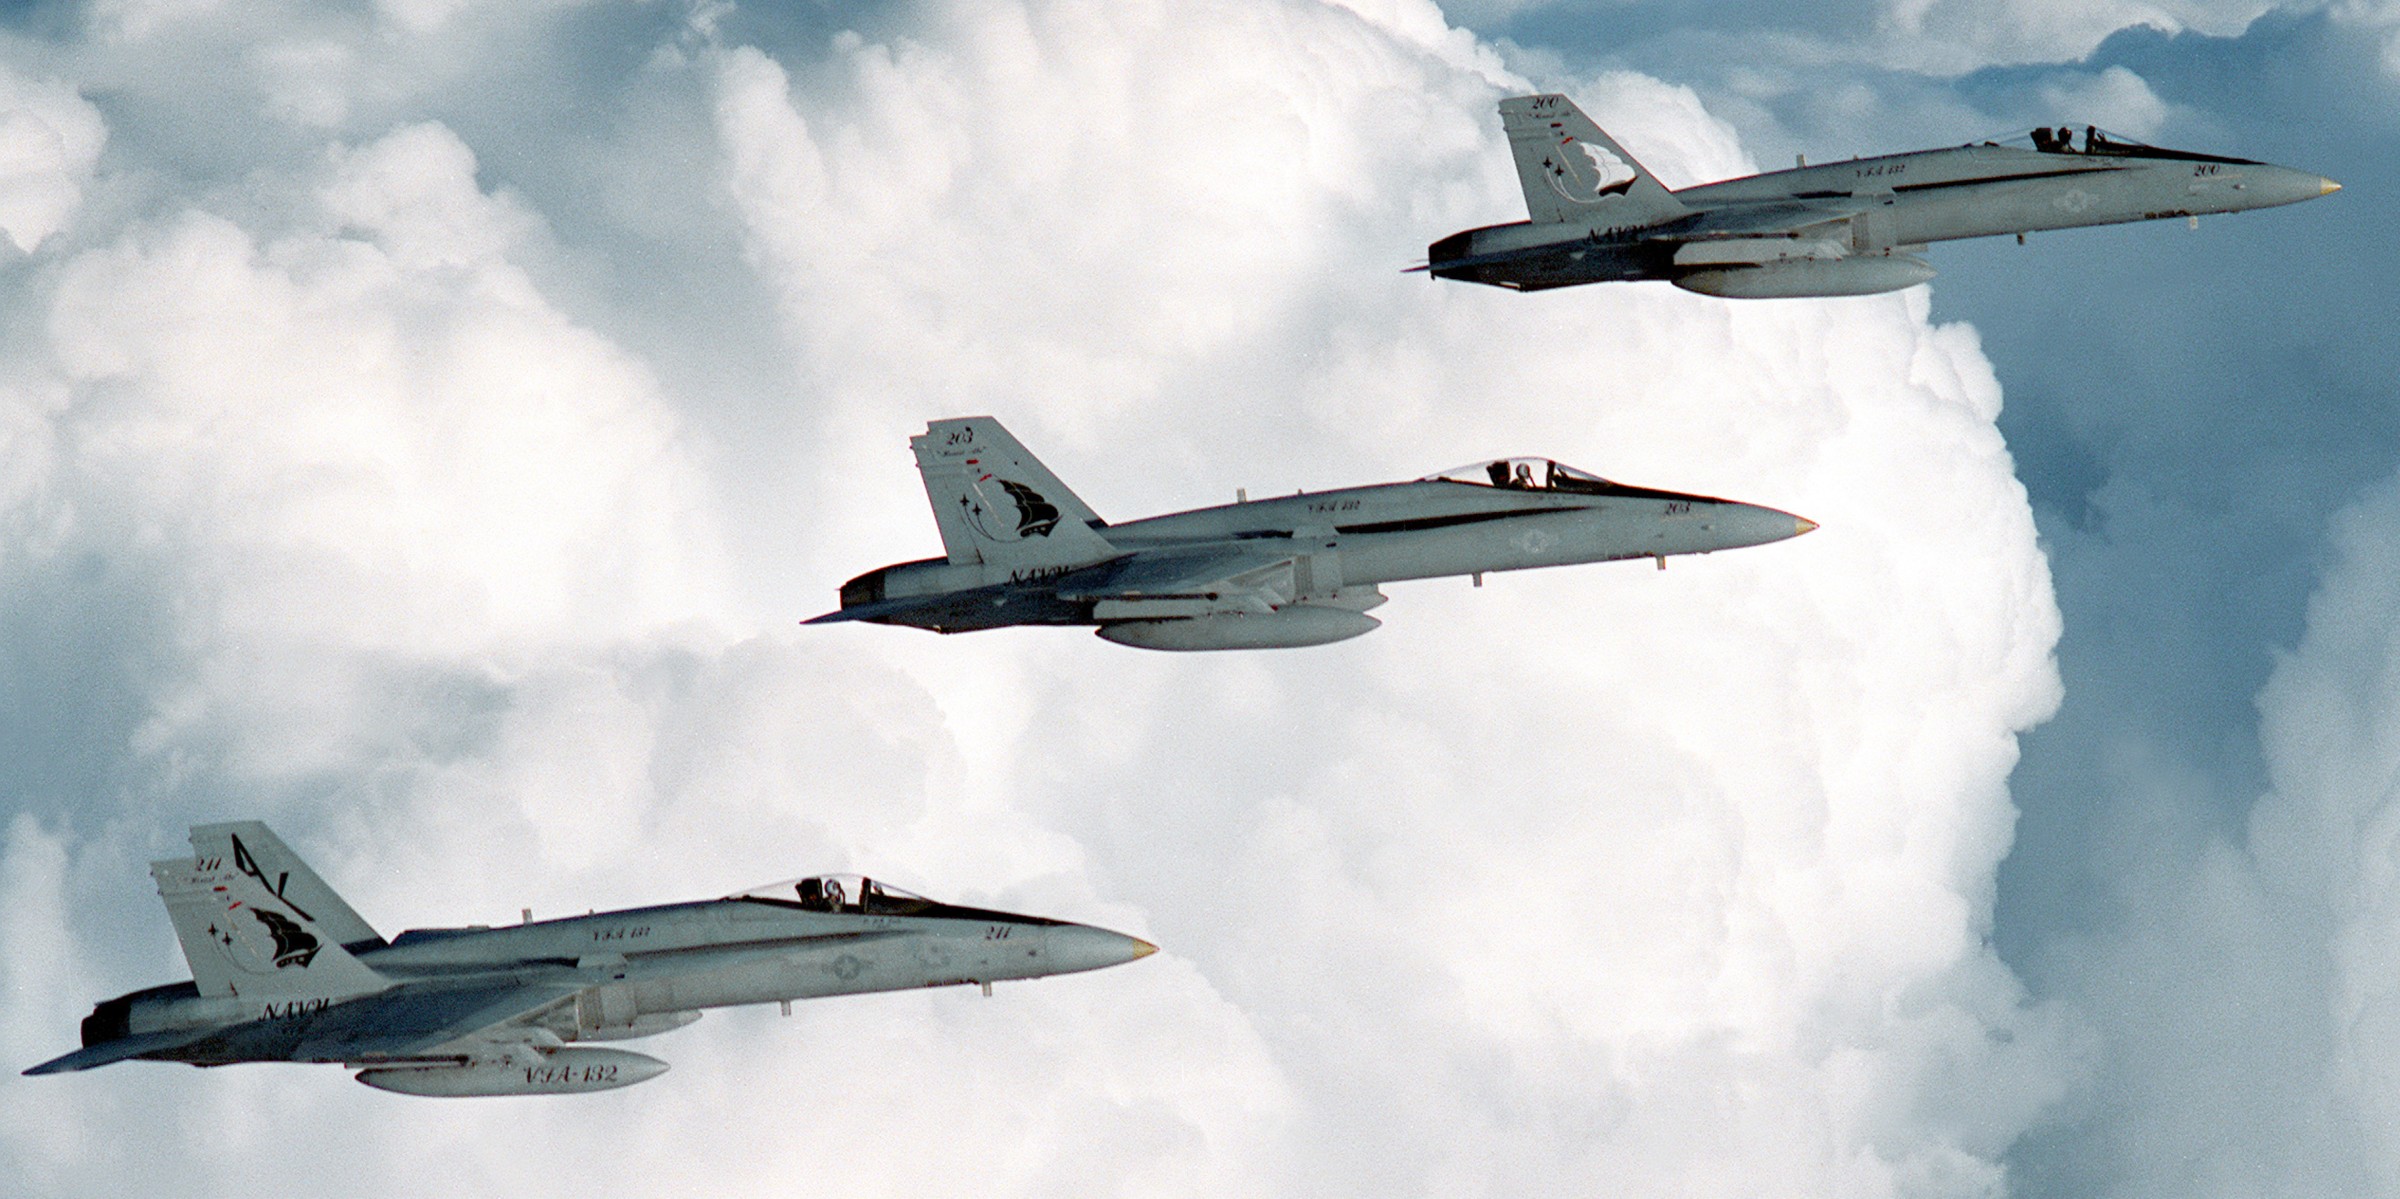 vfa-132 privateers strike fighter squadron f/a-18a hornet cvw-13 uss abraham lincoln cvn-72 1990 17